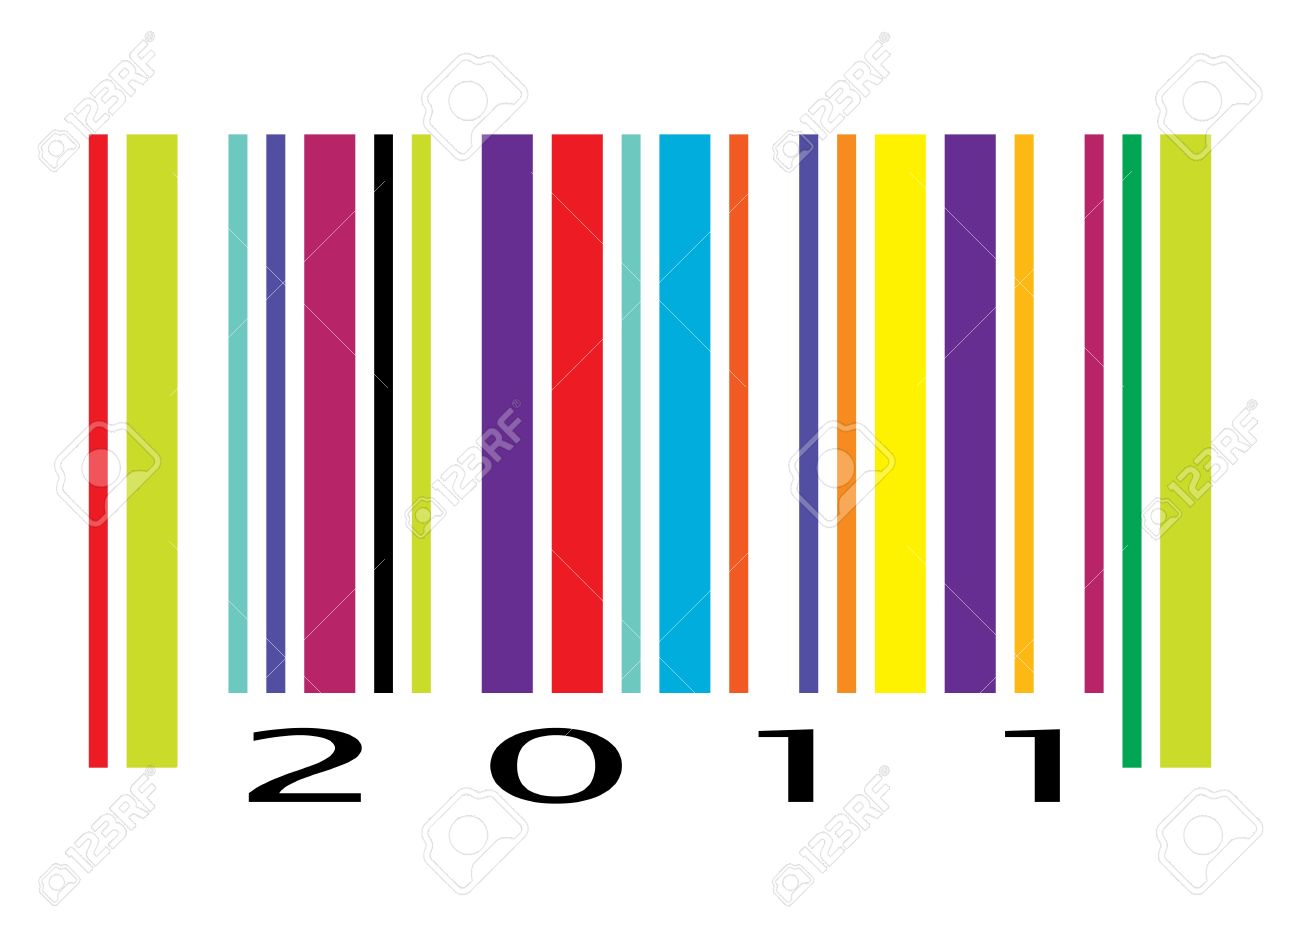 Barcode color